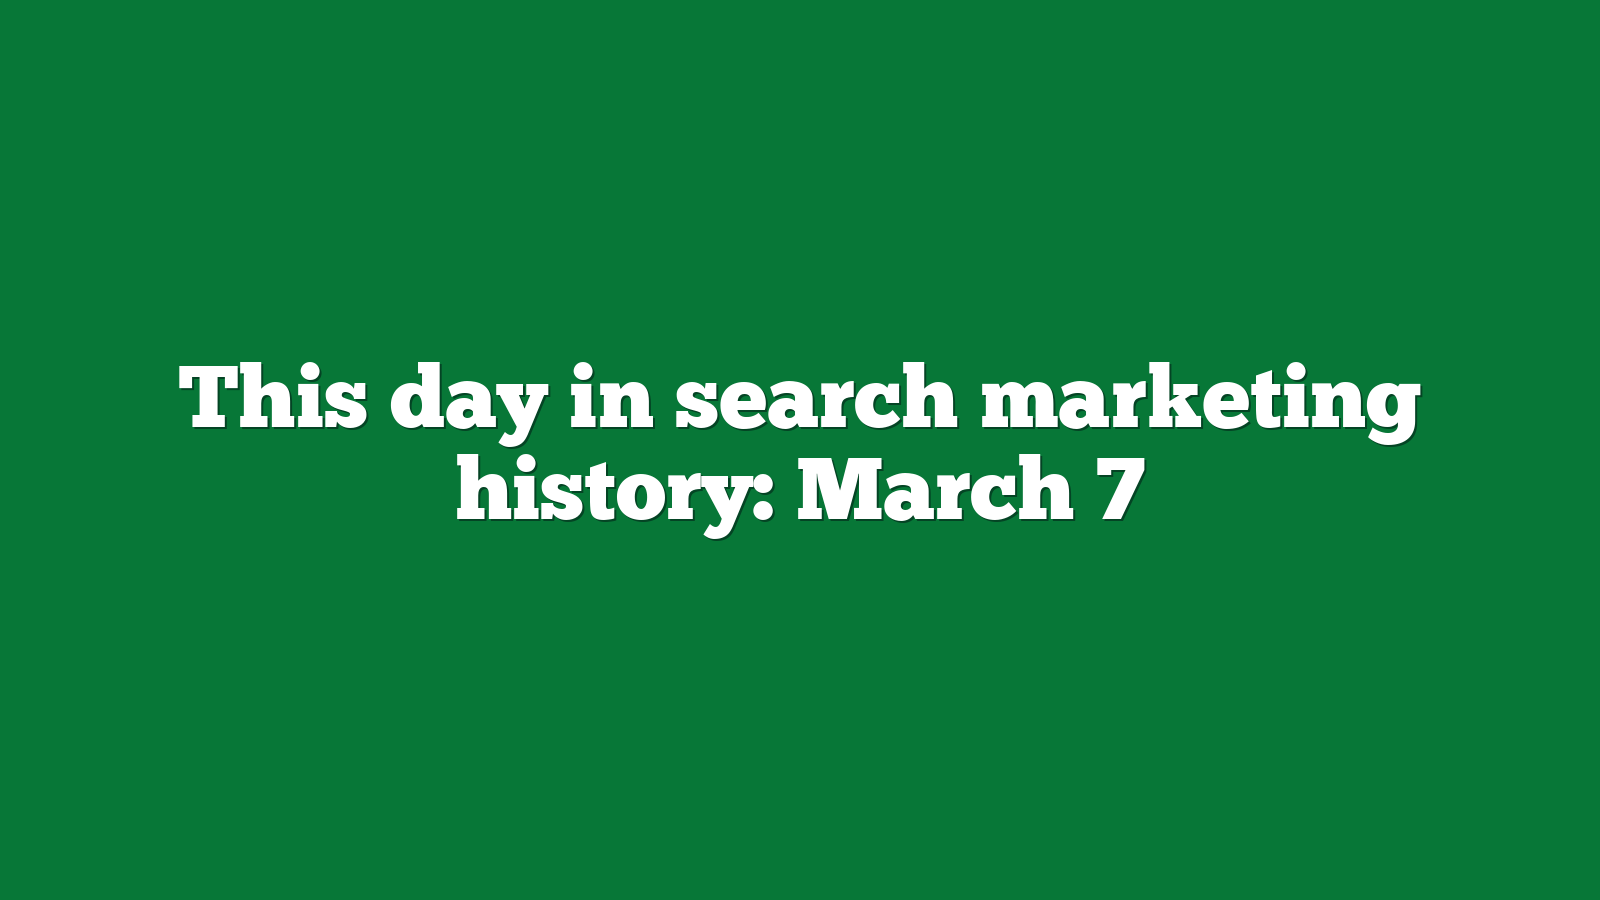 This day in search marketing history: March 7